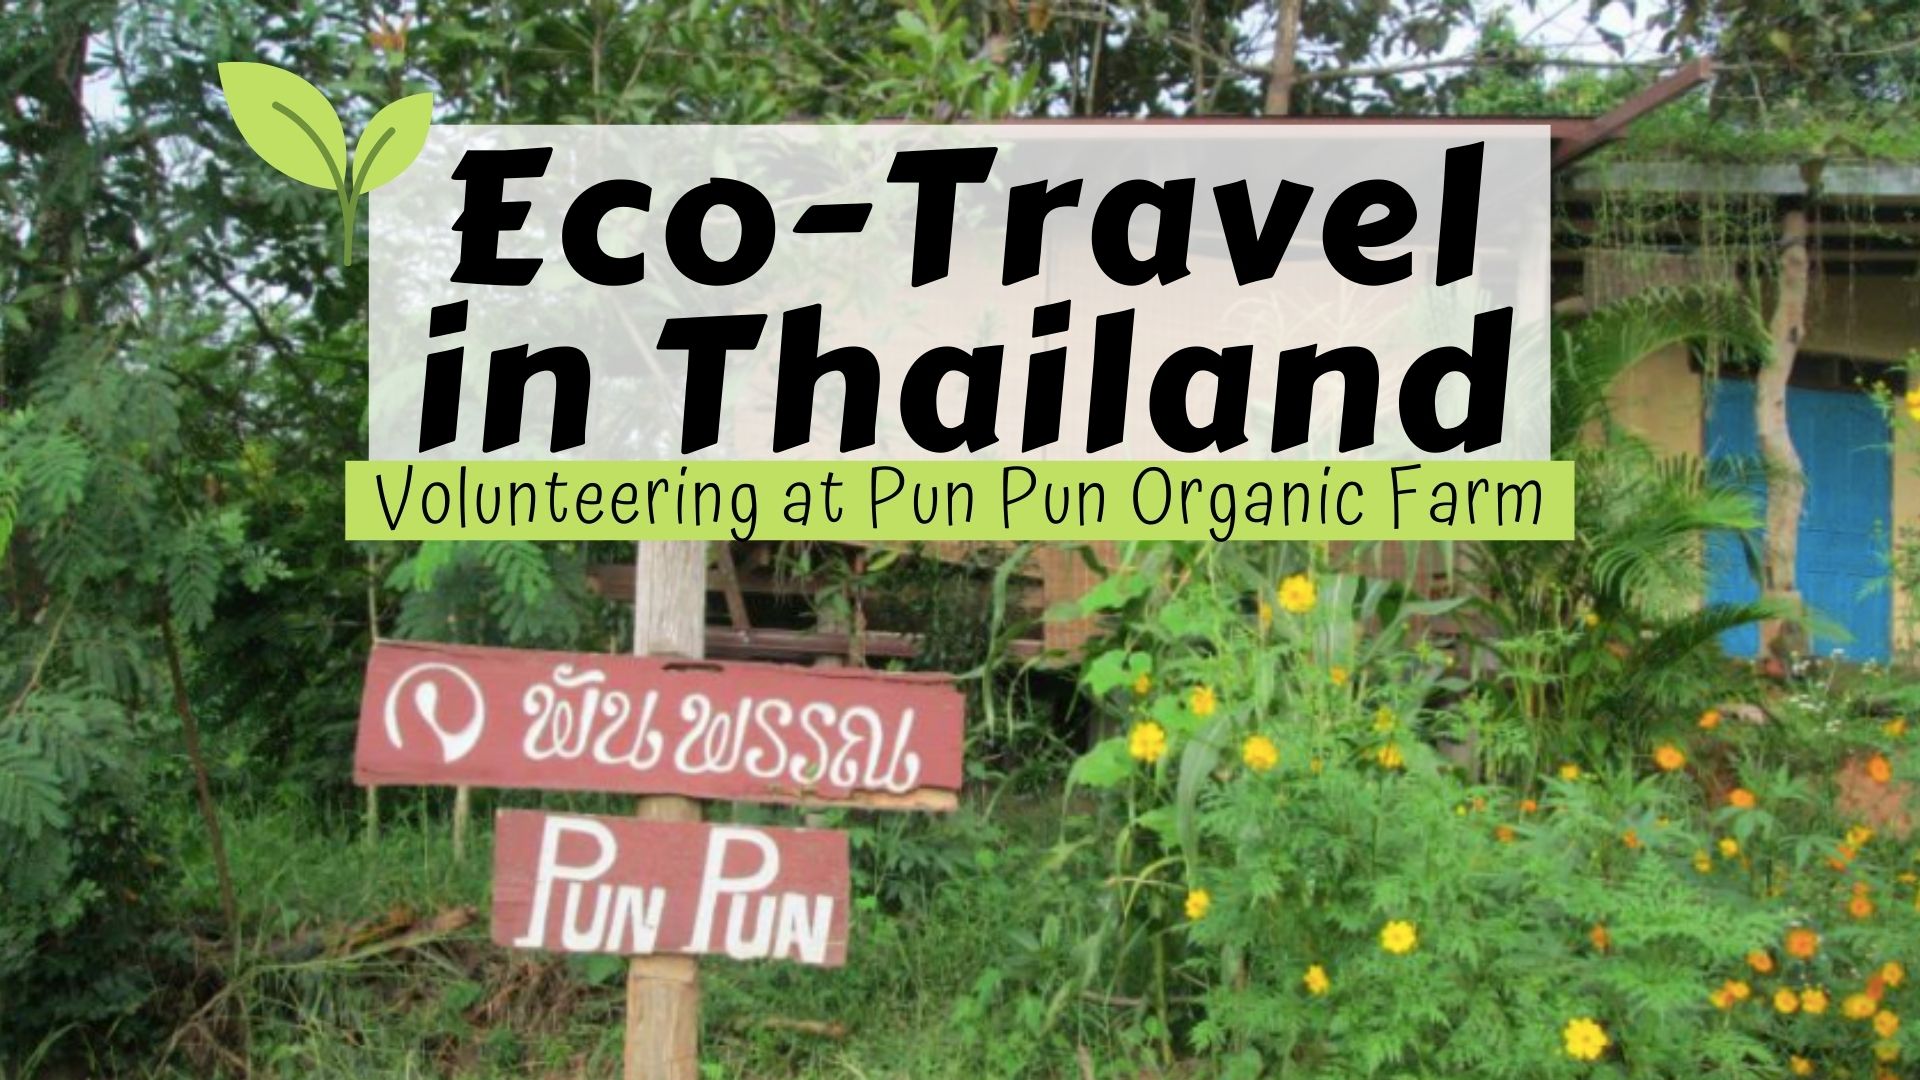 Pun Pun organic farm in Chiang Mai Thailand sign post. Thai characters green farming, sustainable living practices. Pun Pun center for self reliance volunteering experience. Organic farm shop